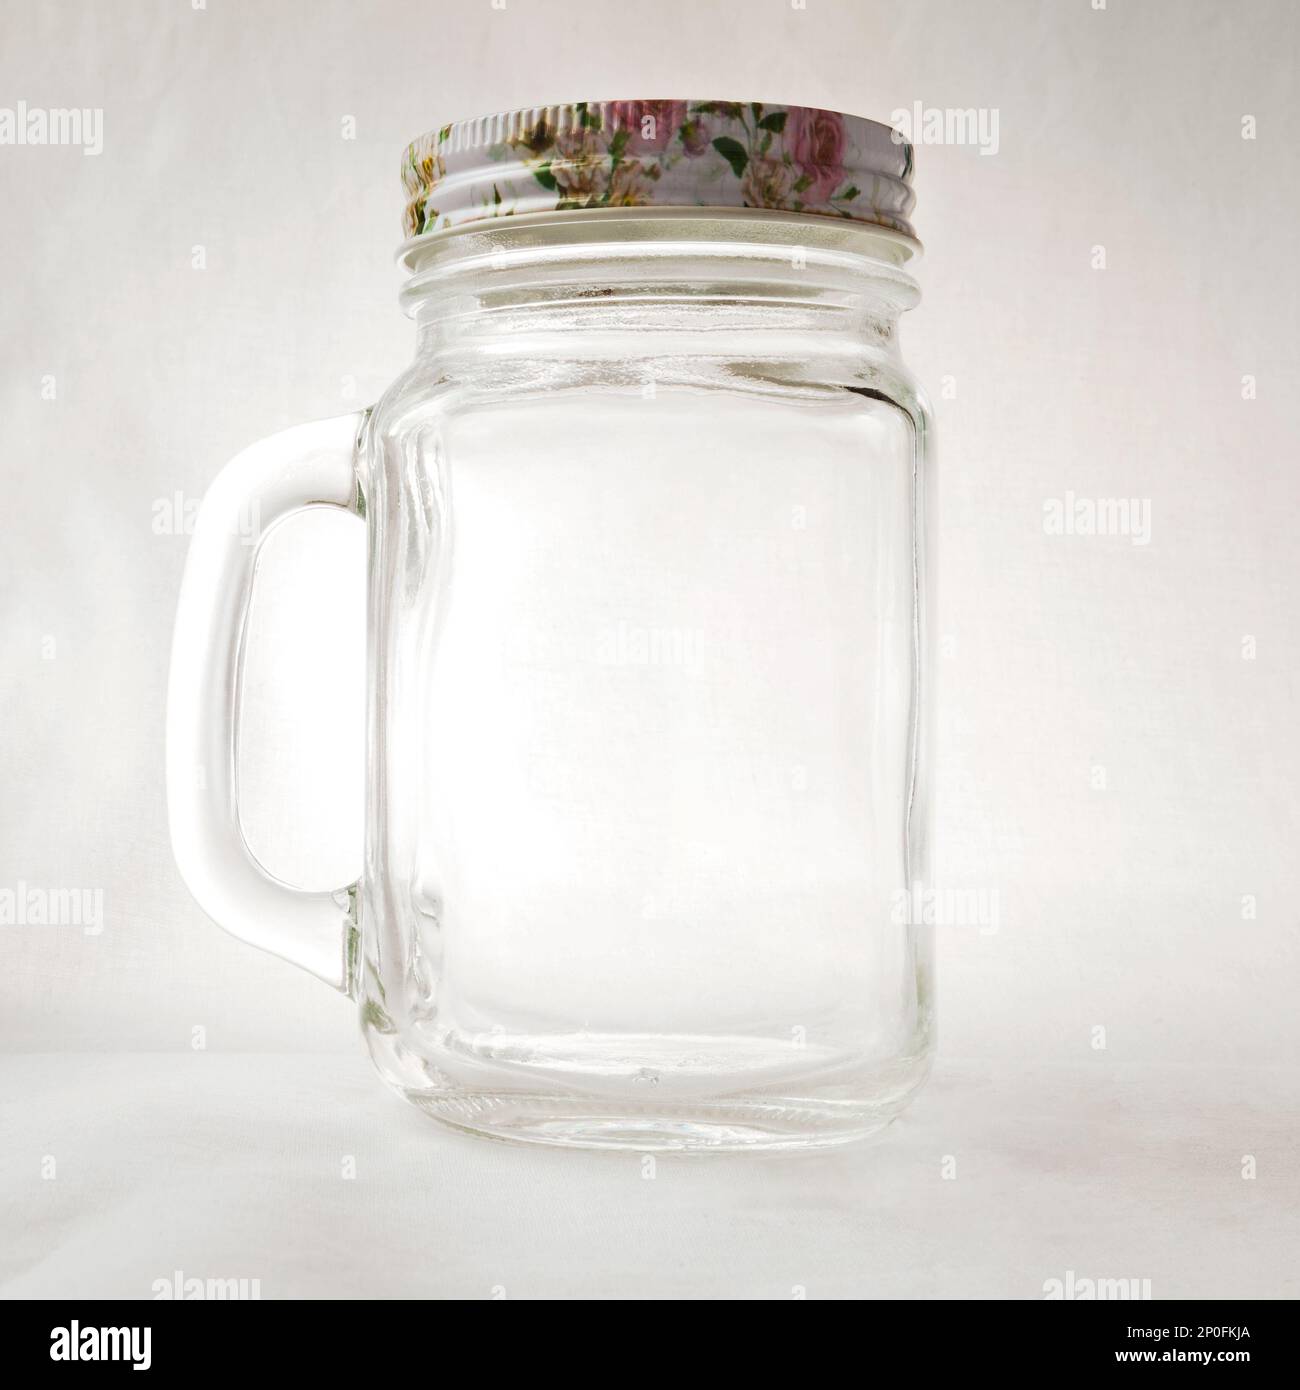 https://c8.alamy.com/comp/2P0FKJA/empty-clear-mason-jar-with-a-handle-and-a-lid-on-white-background-transparent-glass-mug-for-summer-drinks-close-up-2P0FKJA.jpg